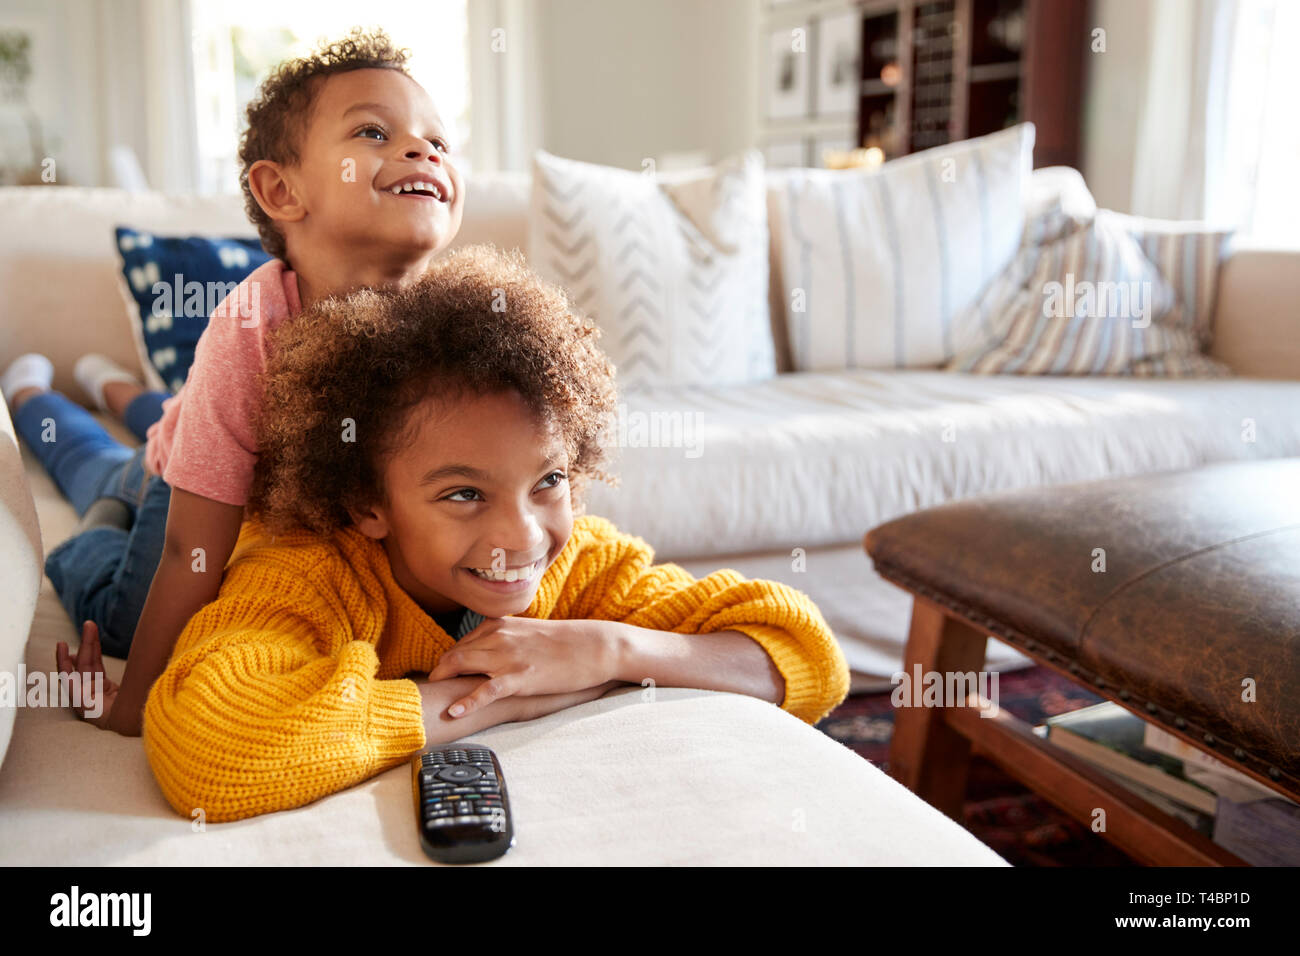 Pre-teen girl lying on sofa watching TV in the living room with her younger brother sitting on her back, close up Stock Photo